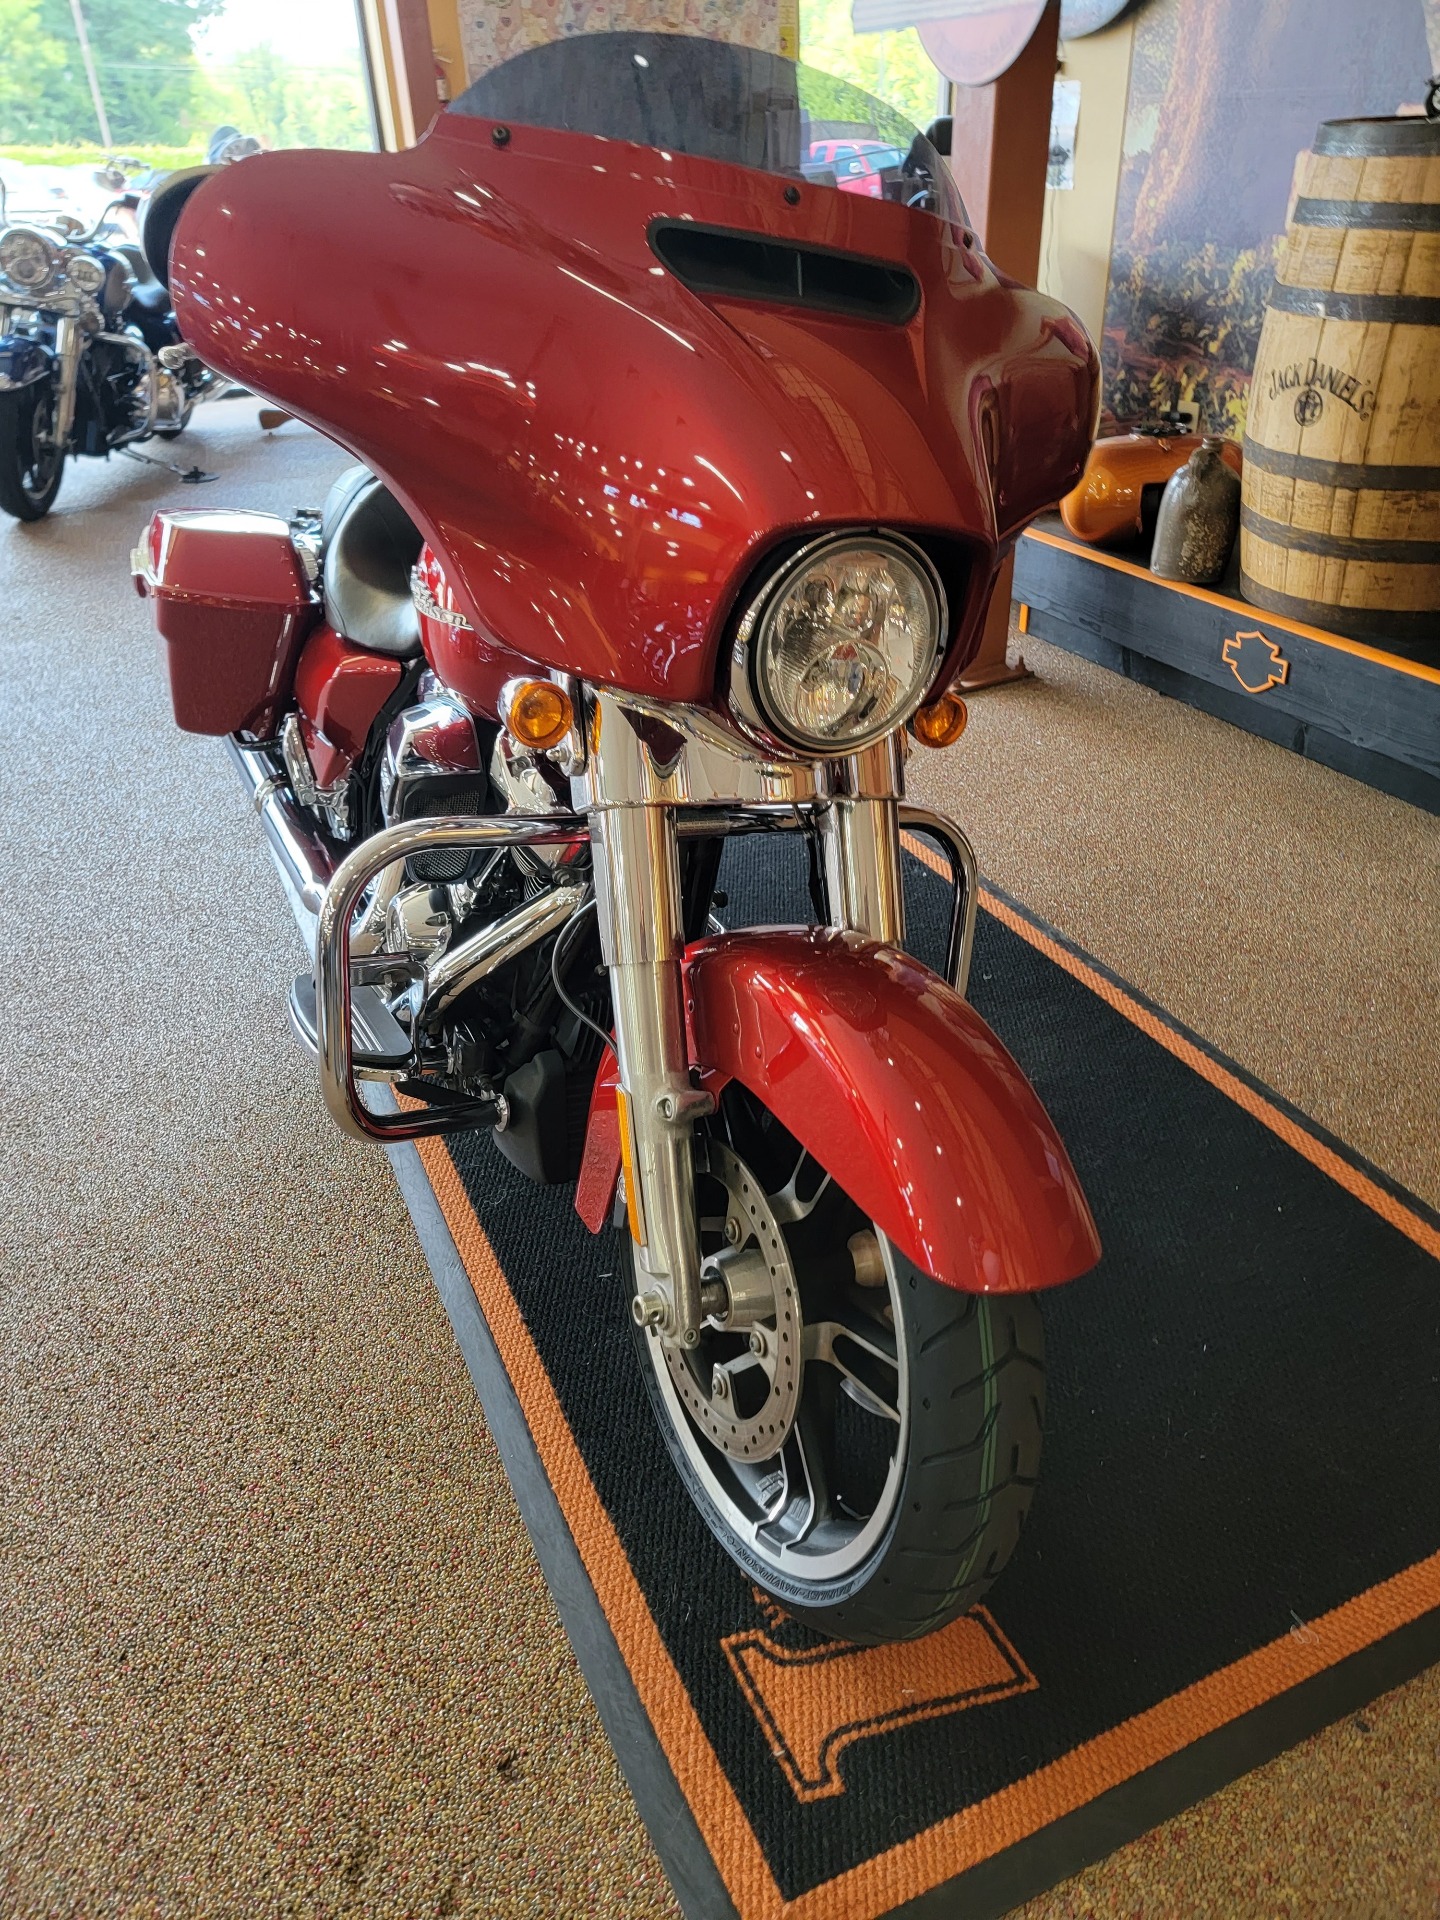 2019 Harley-Davidson Street Glide® in Knoxville, Tennessee - Photo 3